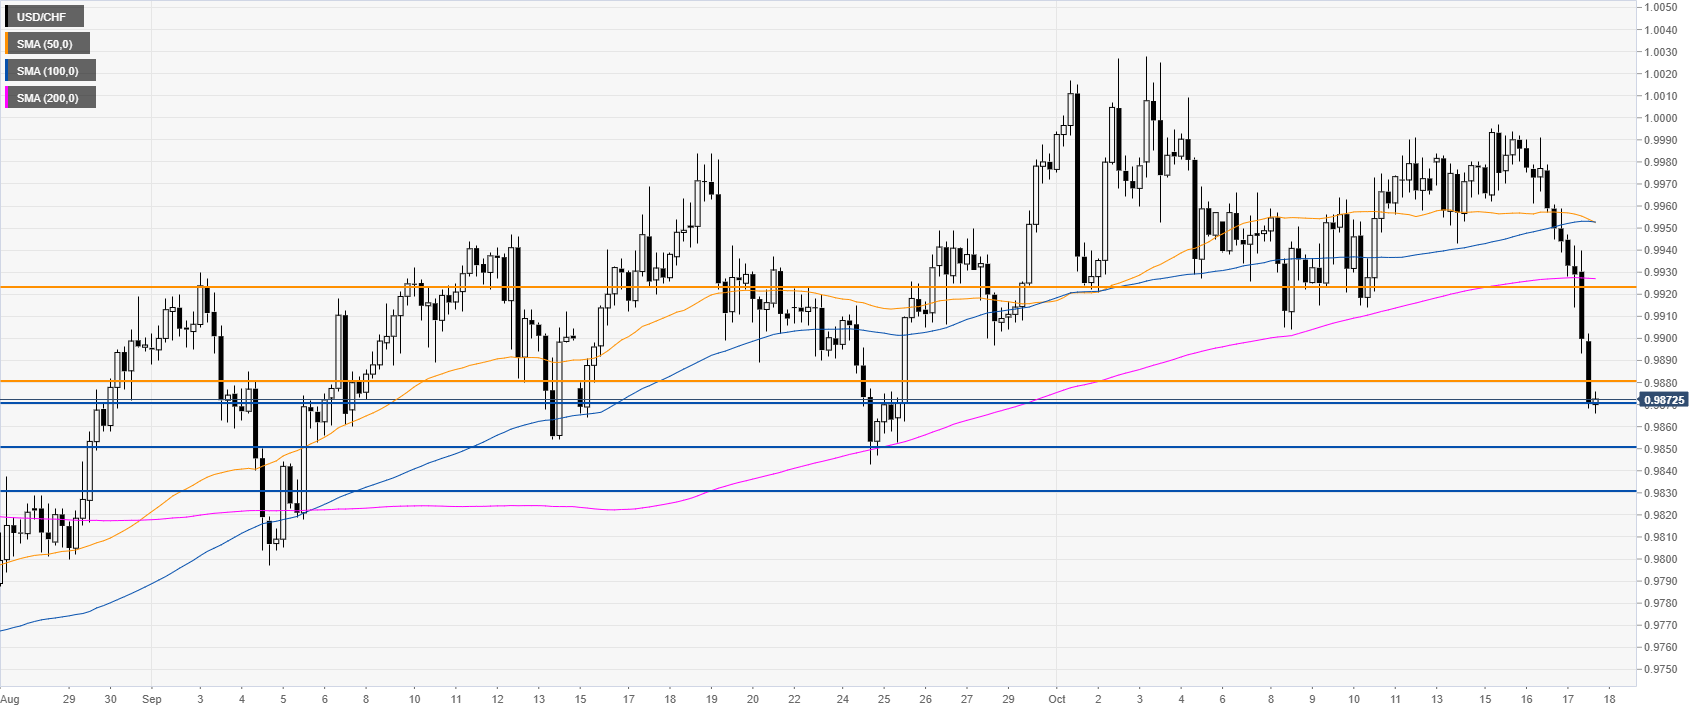 USD/CHF technical analysis: Greenback hits fresh October lows against the Swiss Franc